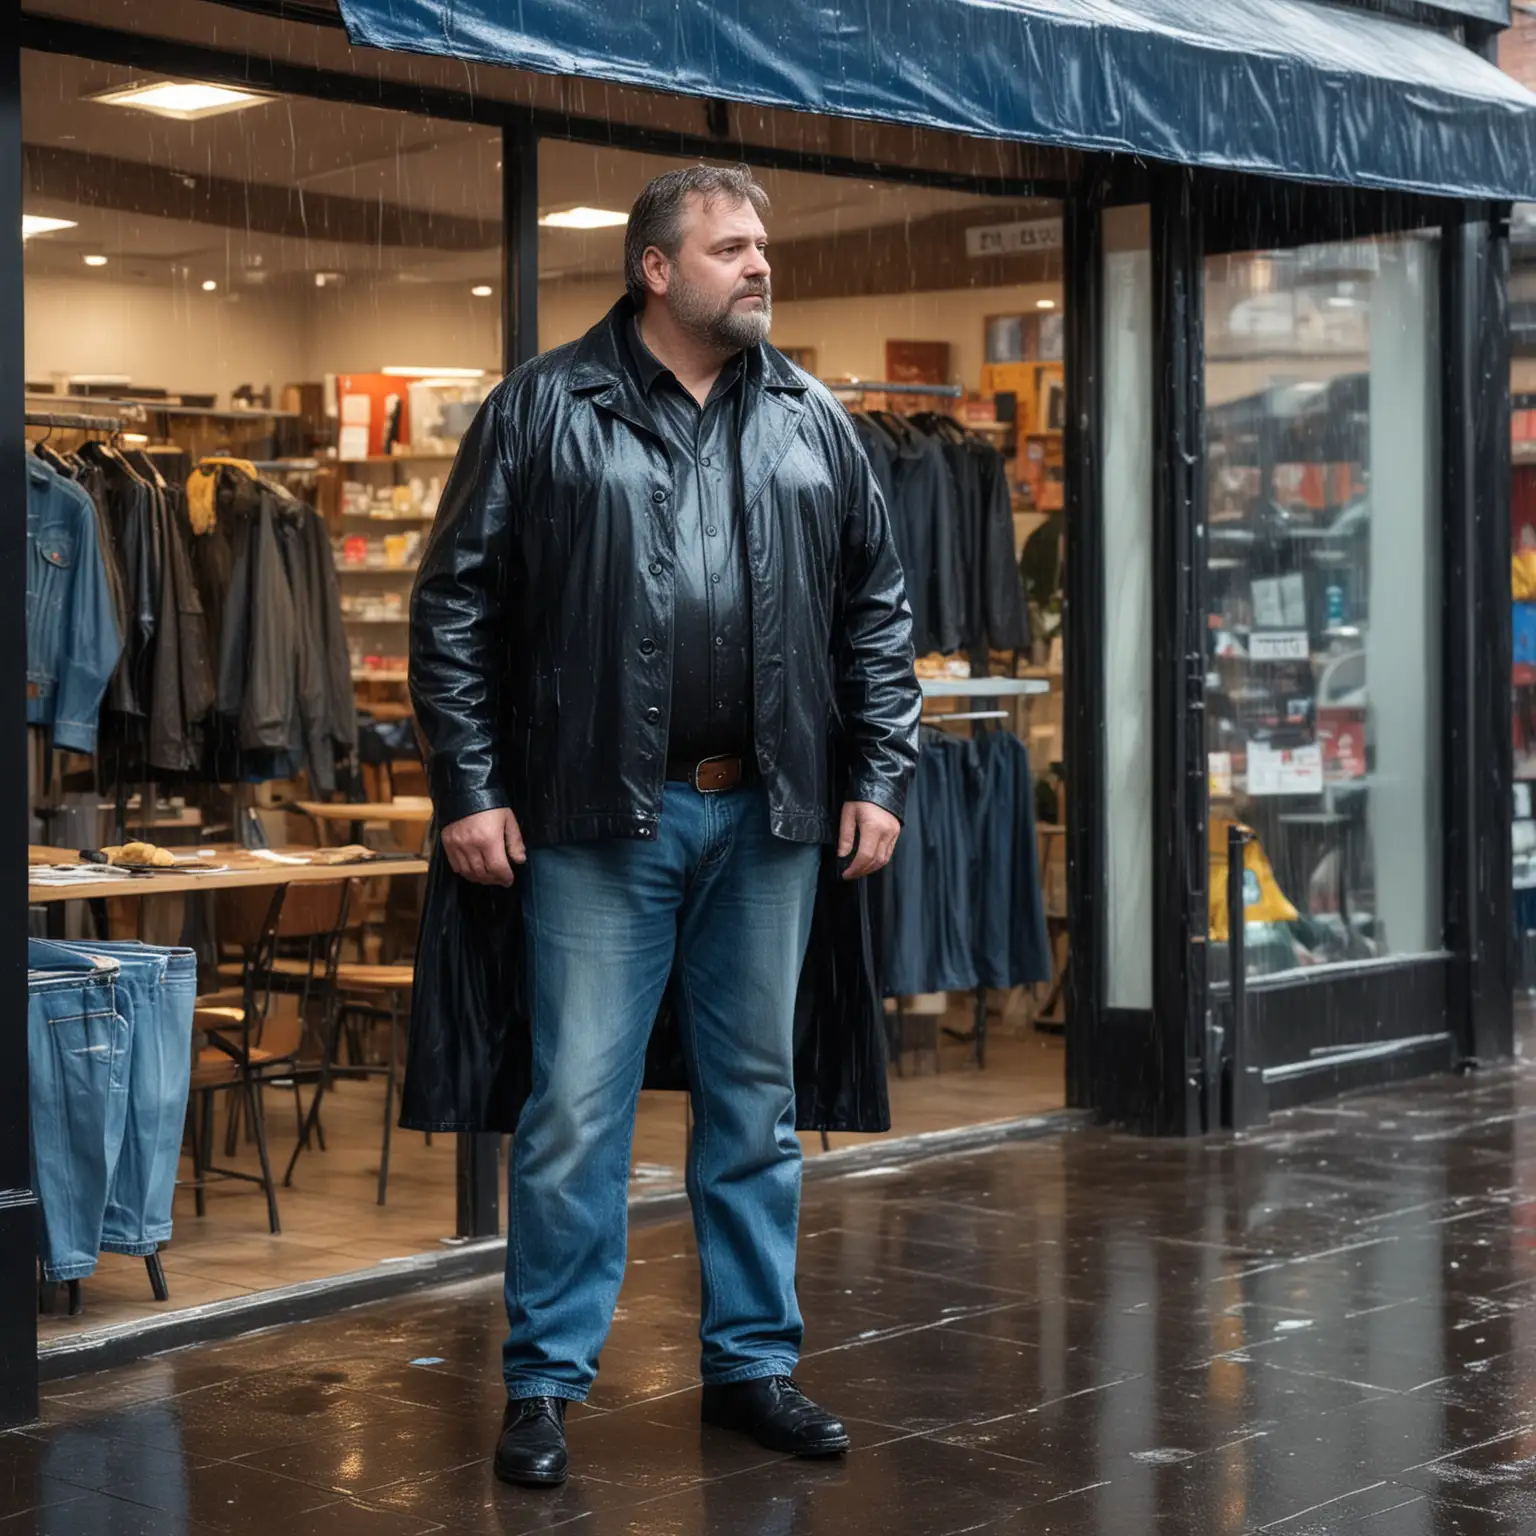 Middle age large man dress in a black leather and blue jeans under a store awning during a rainstorm